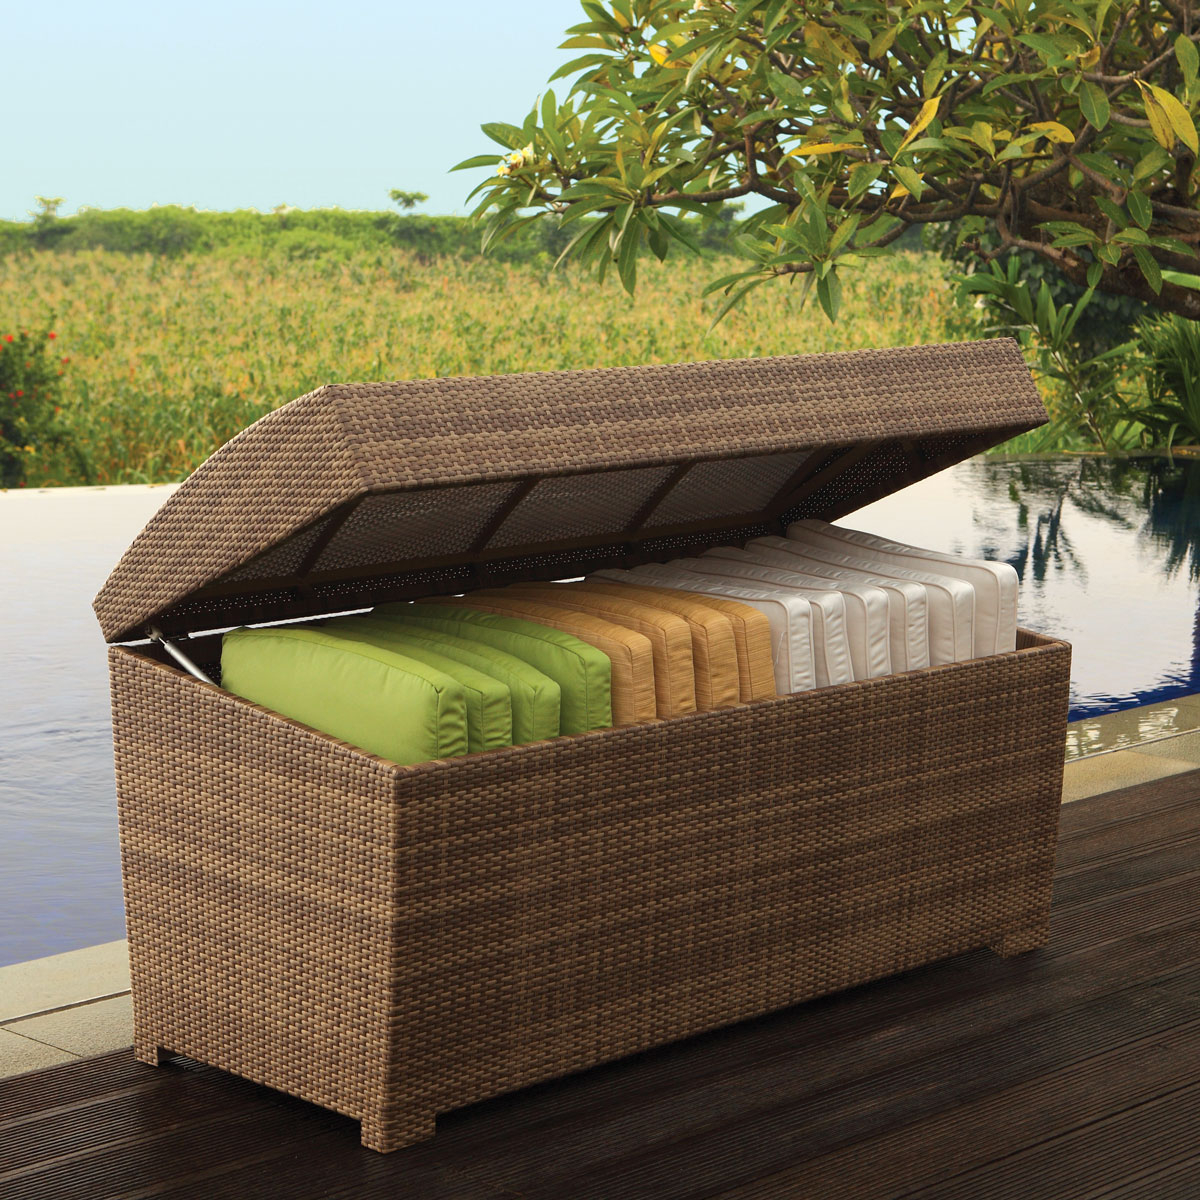 Deck Outdoor Cushion Storage Box Storage Ideas Go Very Well To within sizing 1200 X 1200